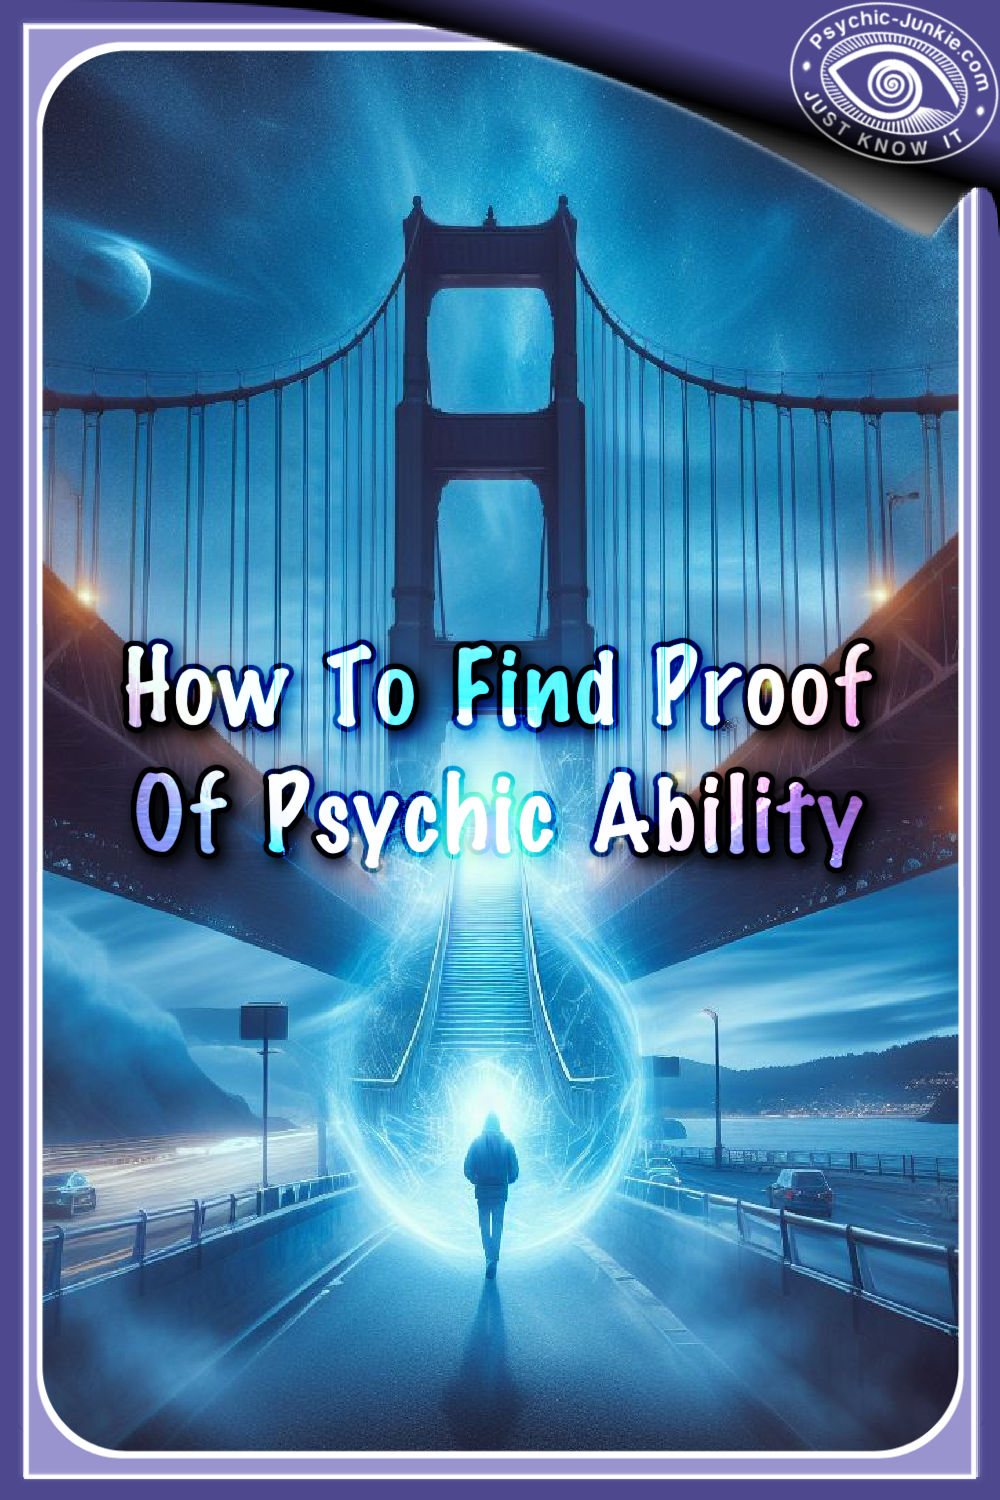 Find Your Own Evidence Of Psychic Ability